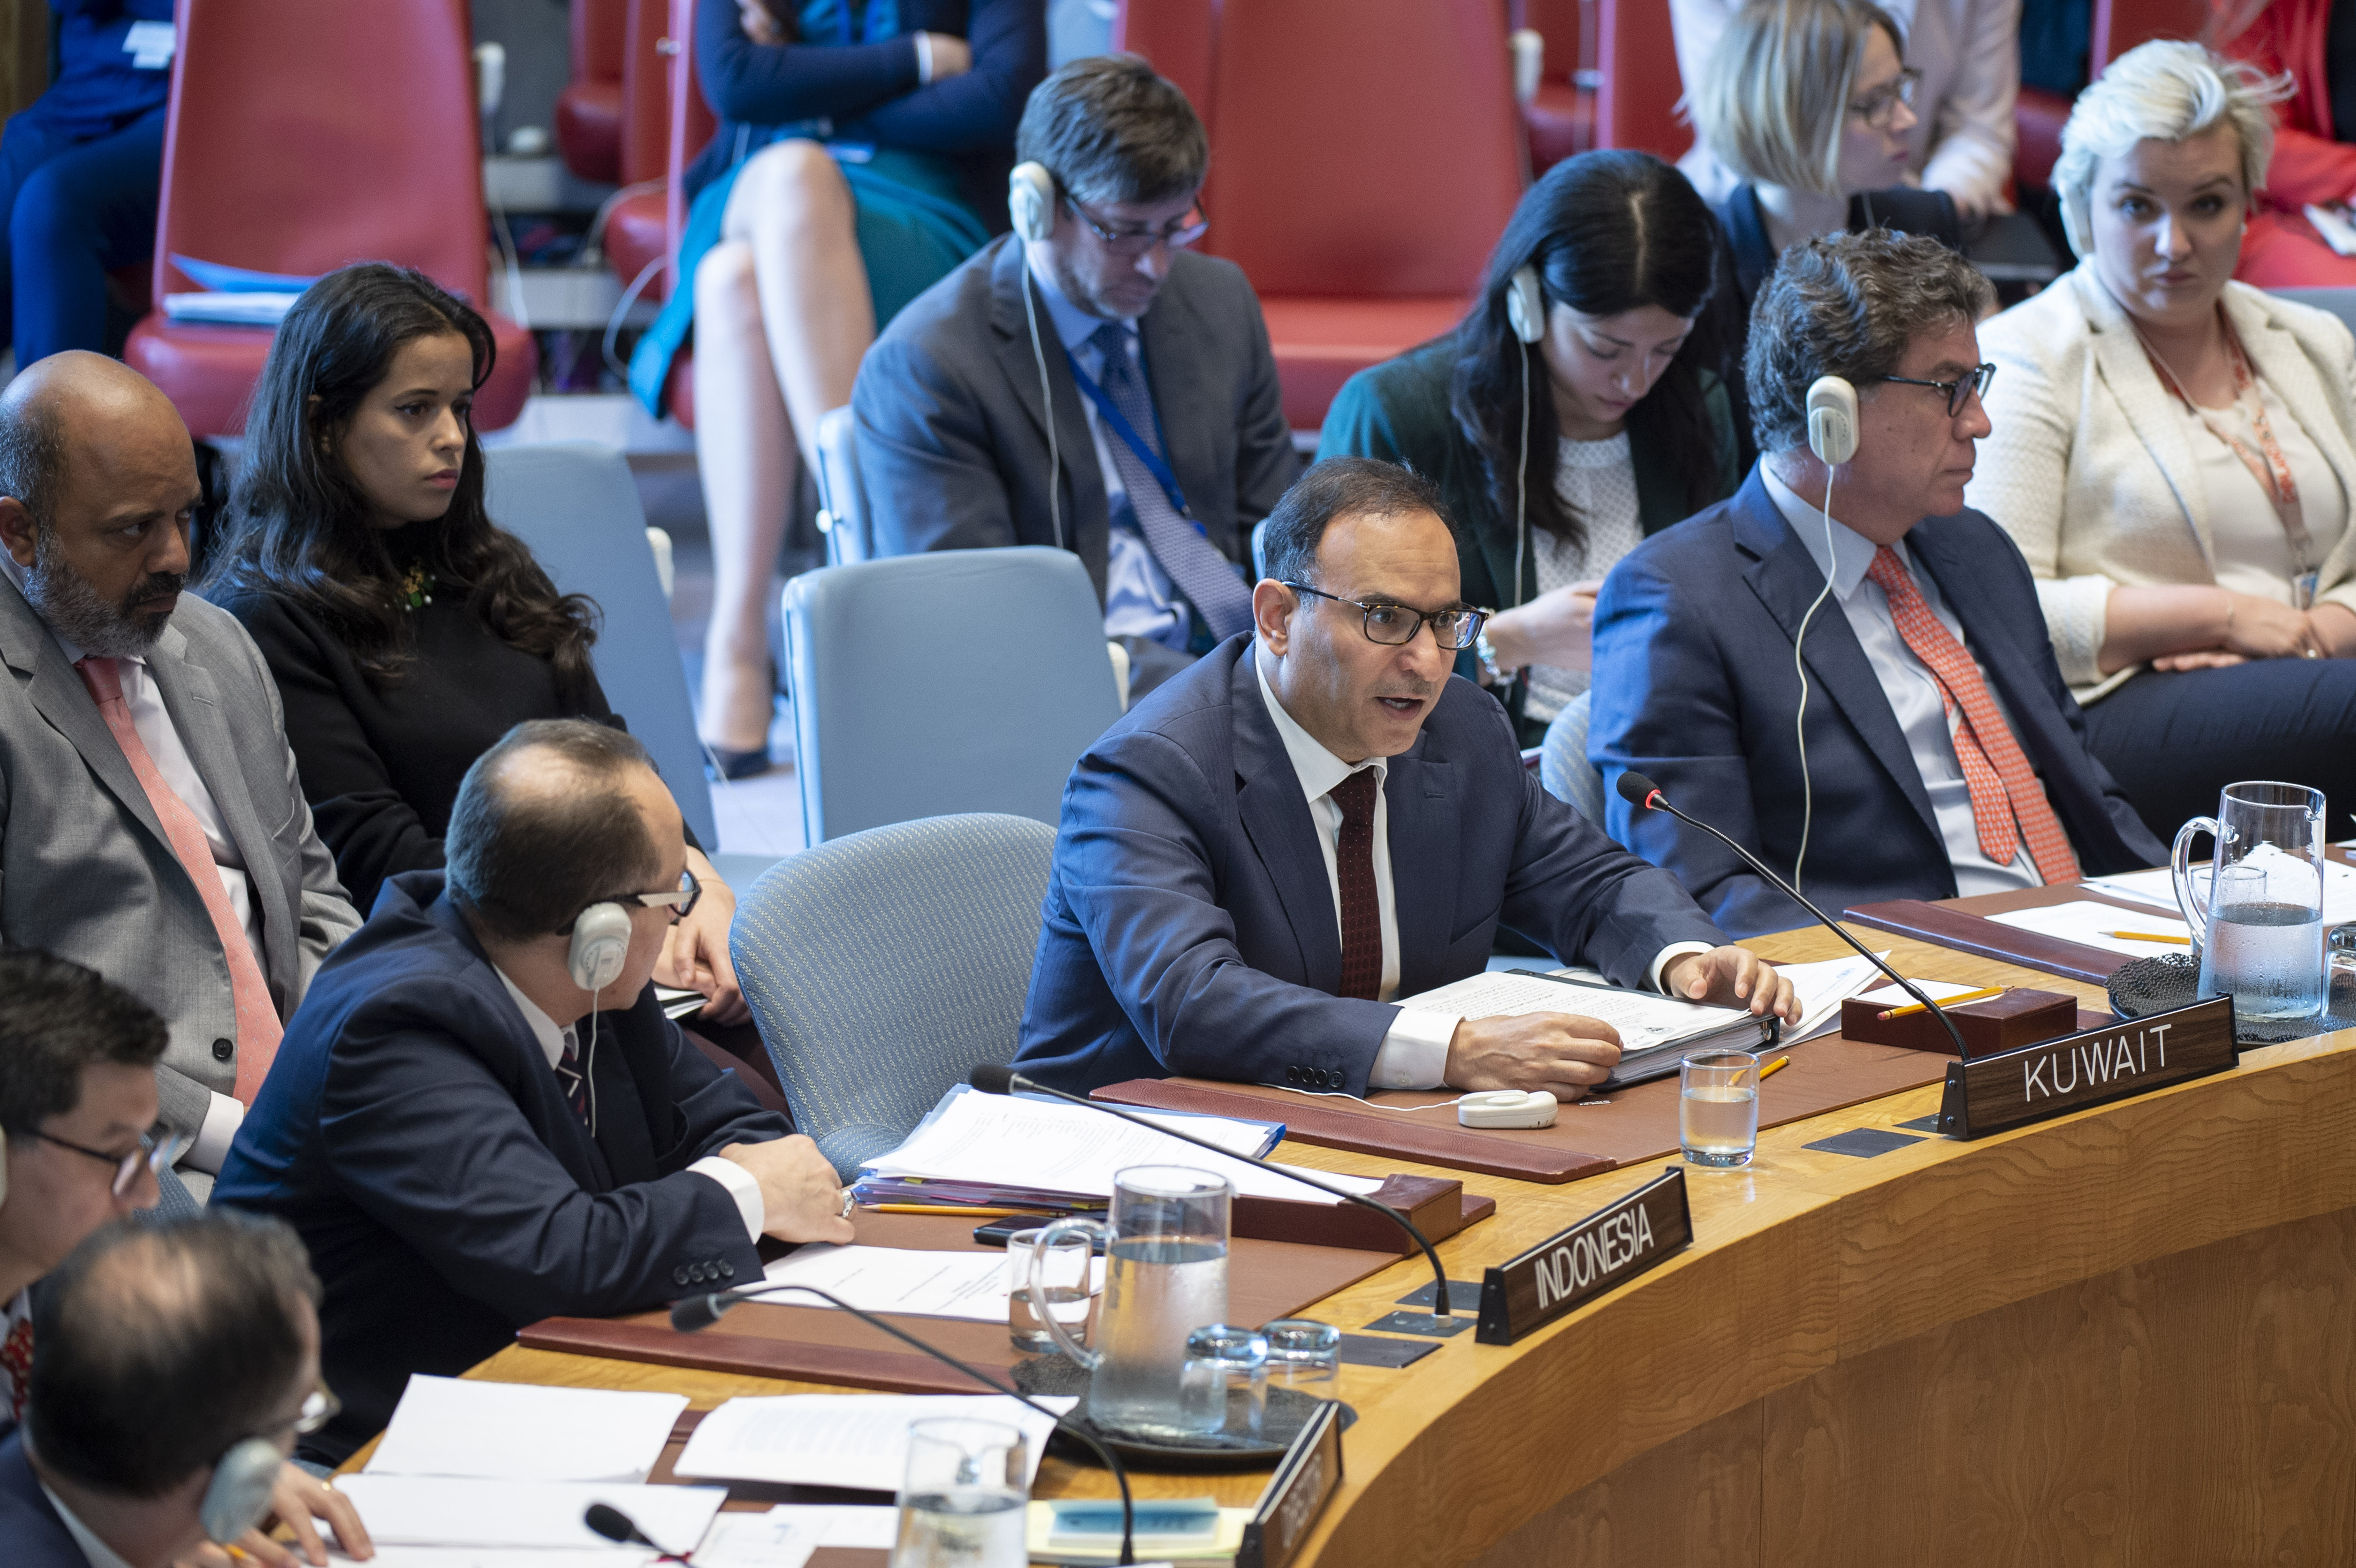 Kuwait's permanent representative at the UN Mansour Al-Otaibi during a UN Security Council session on sexual violence in conflict